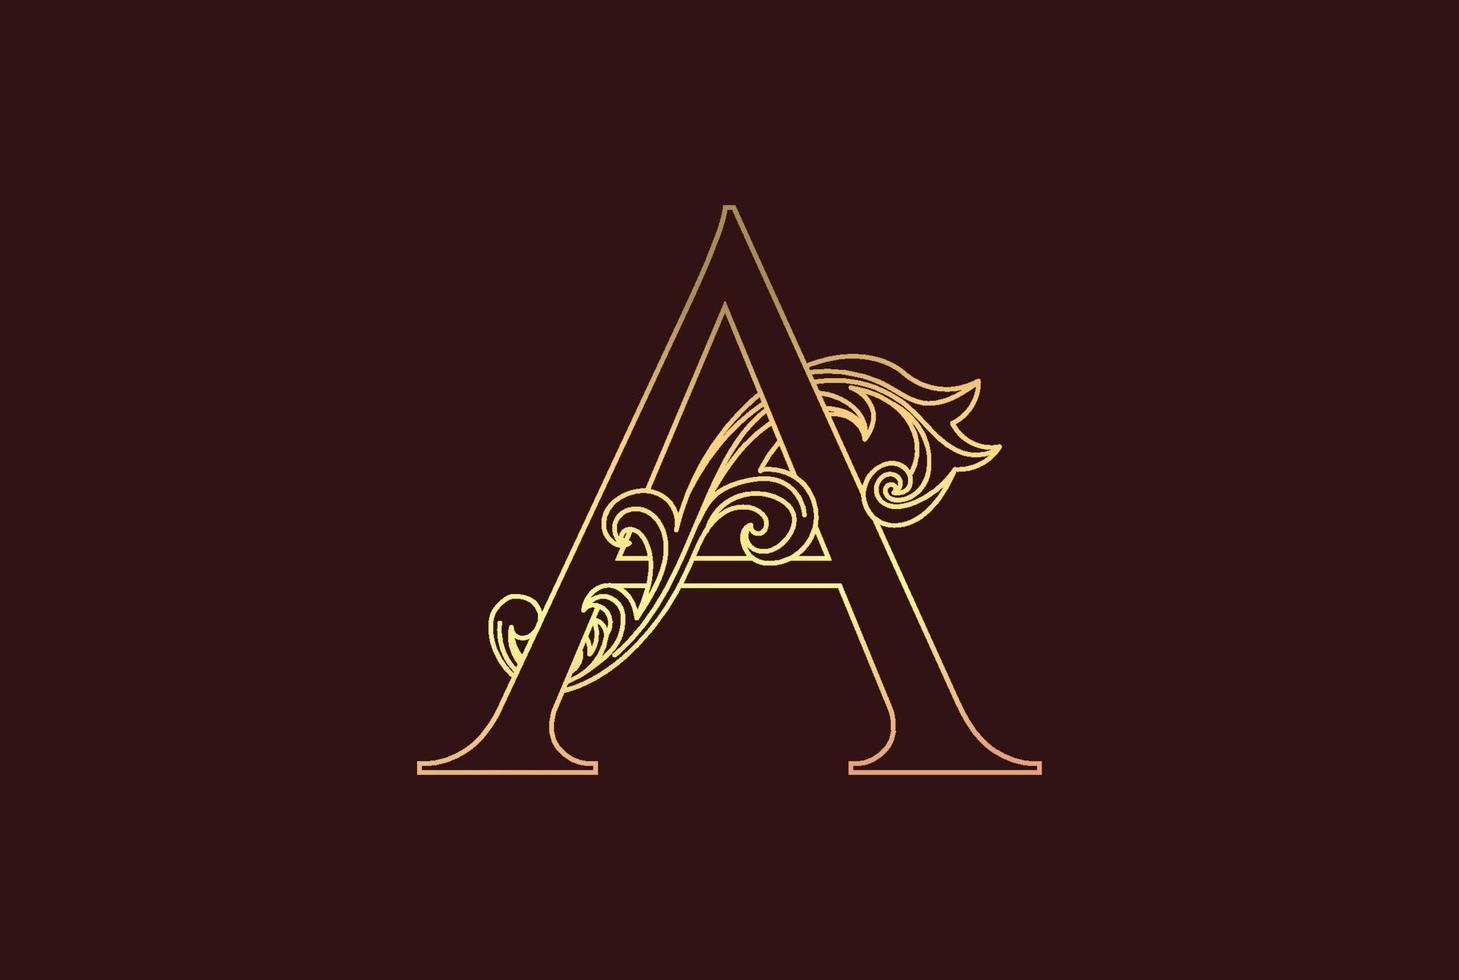 Golden Elegant Luxury Initial Letter A with Swirl Floral Ornament Logo and Dark Red Background vector